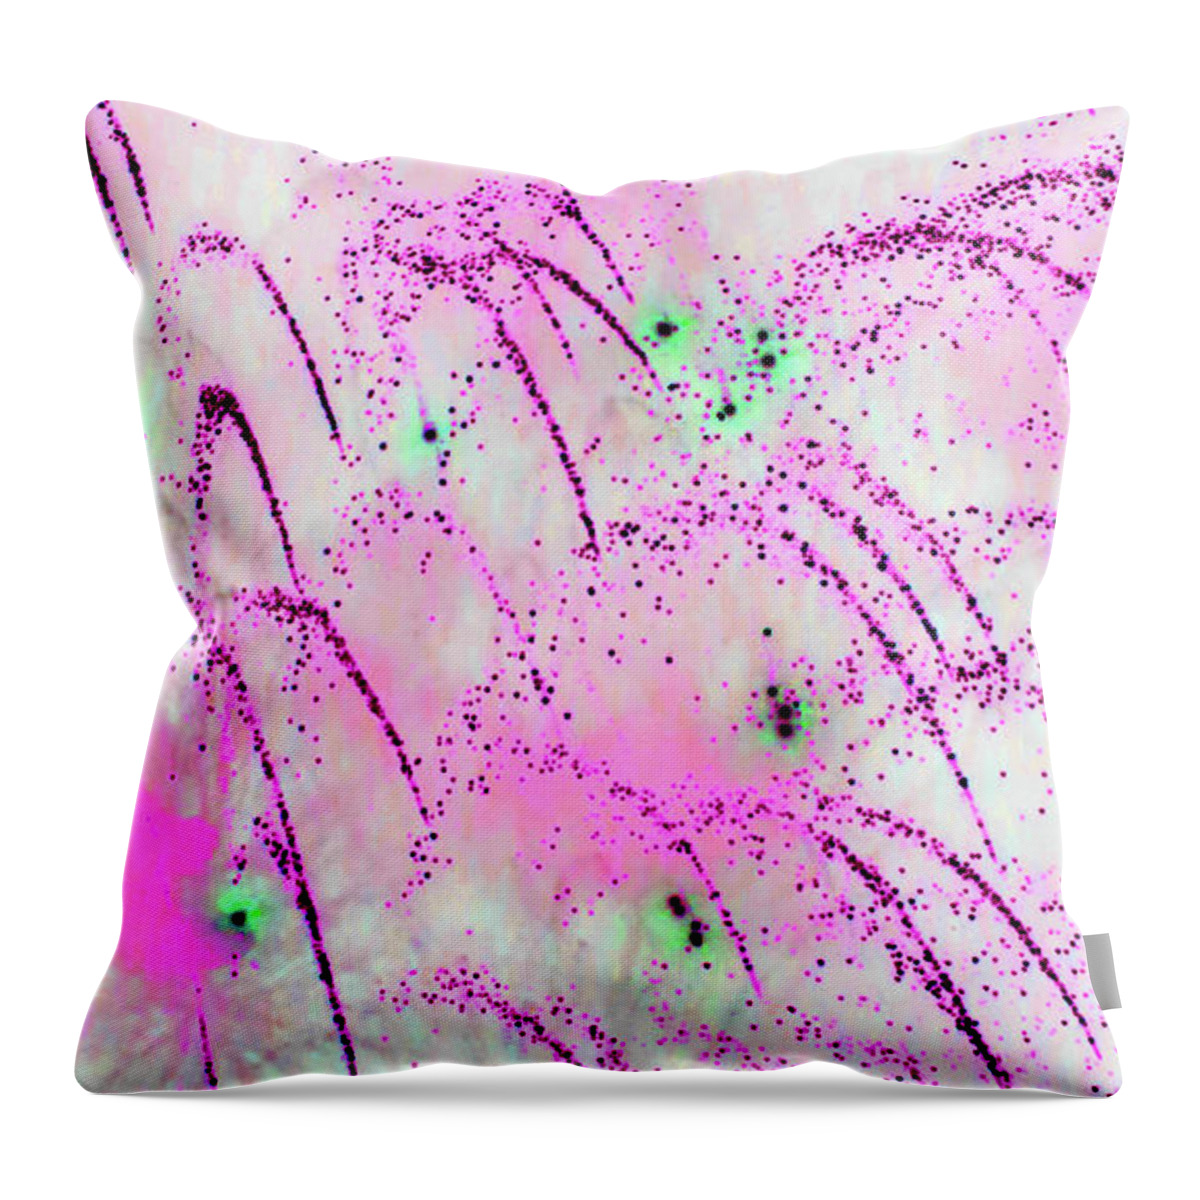 Fireworks Throw Pillow featuring the photograph Fireworks 10 2018 abstracted by Mary Bedy